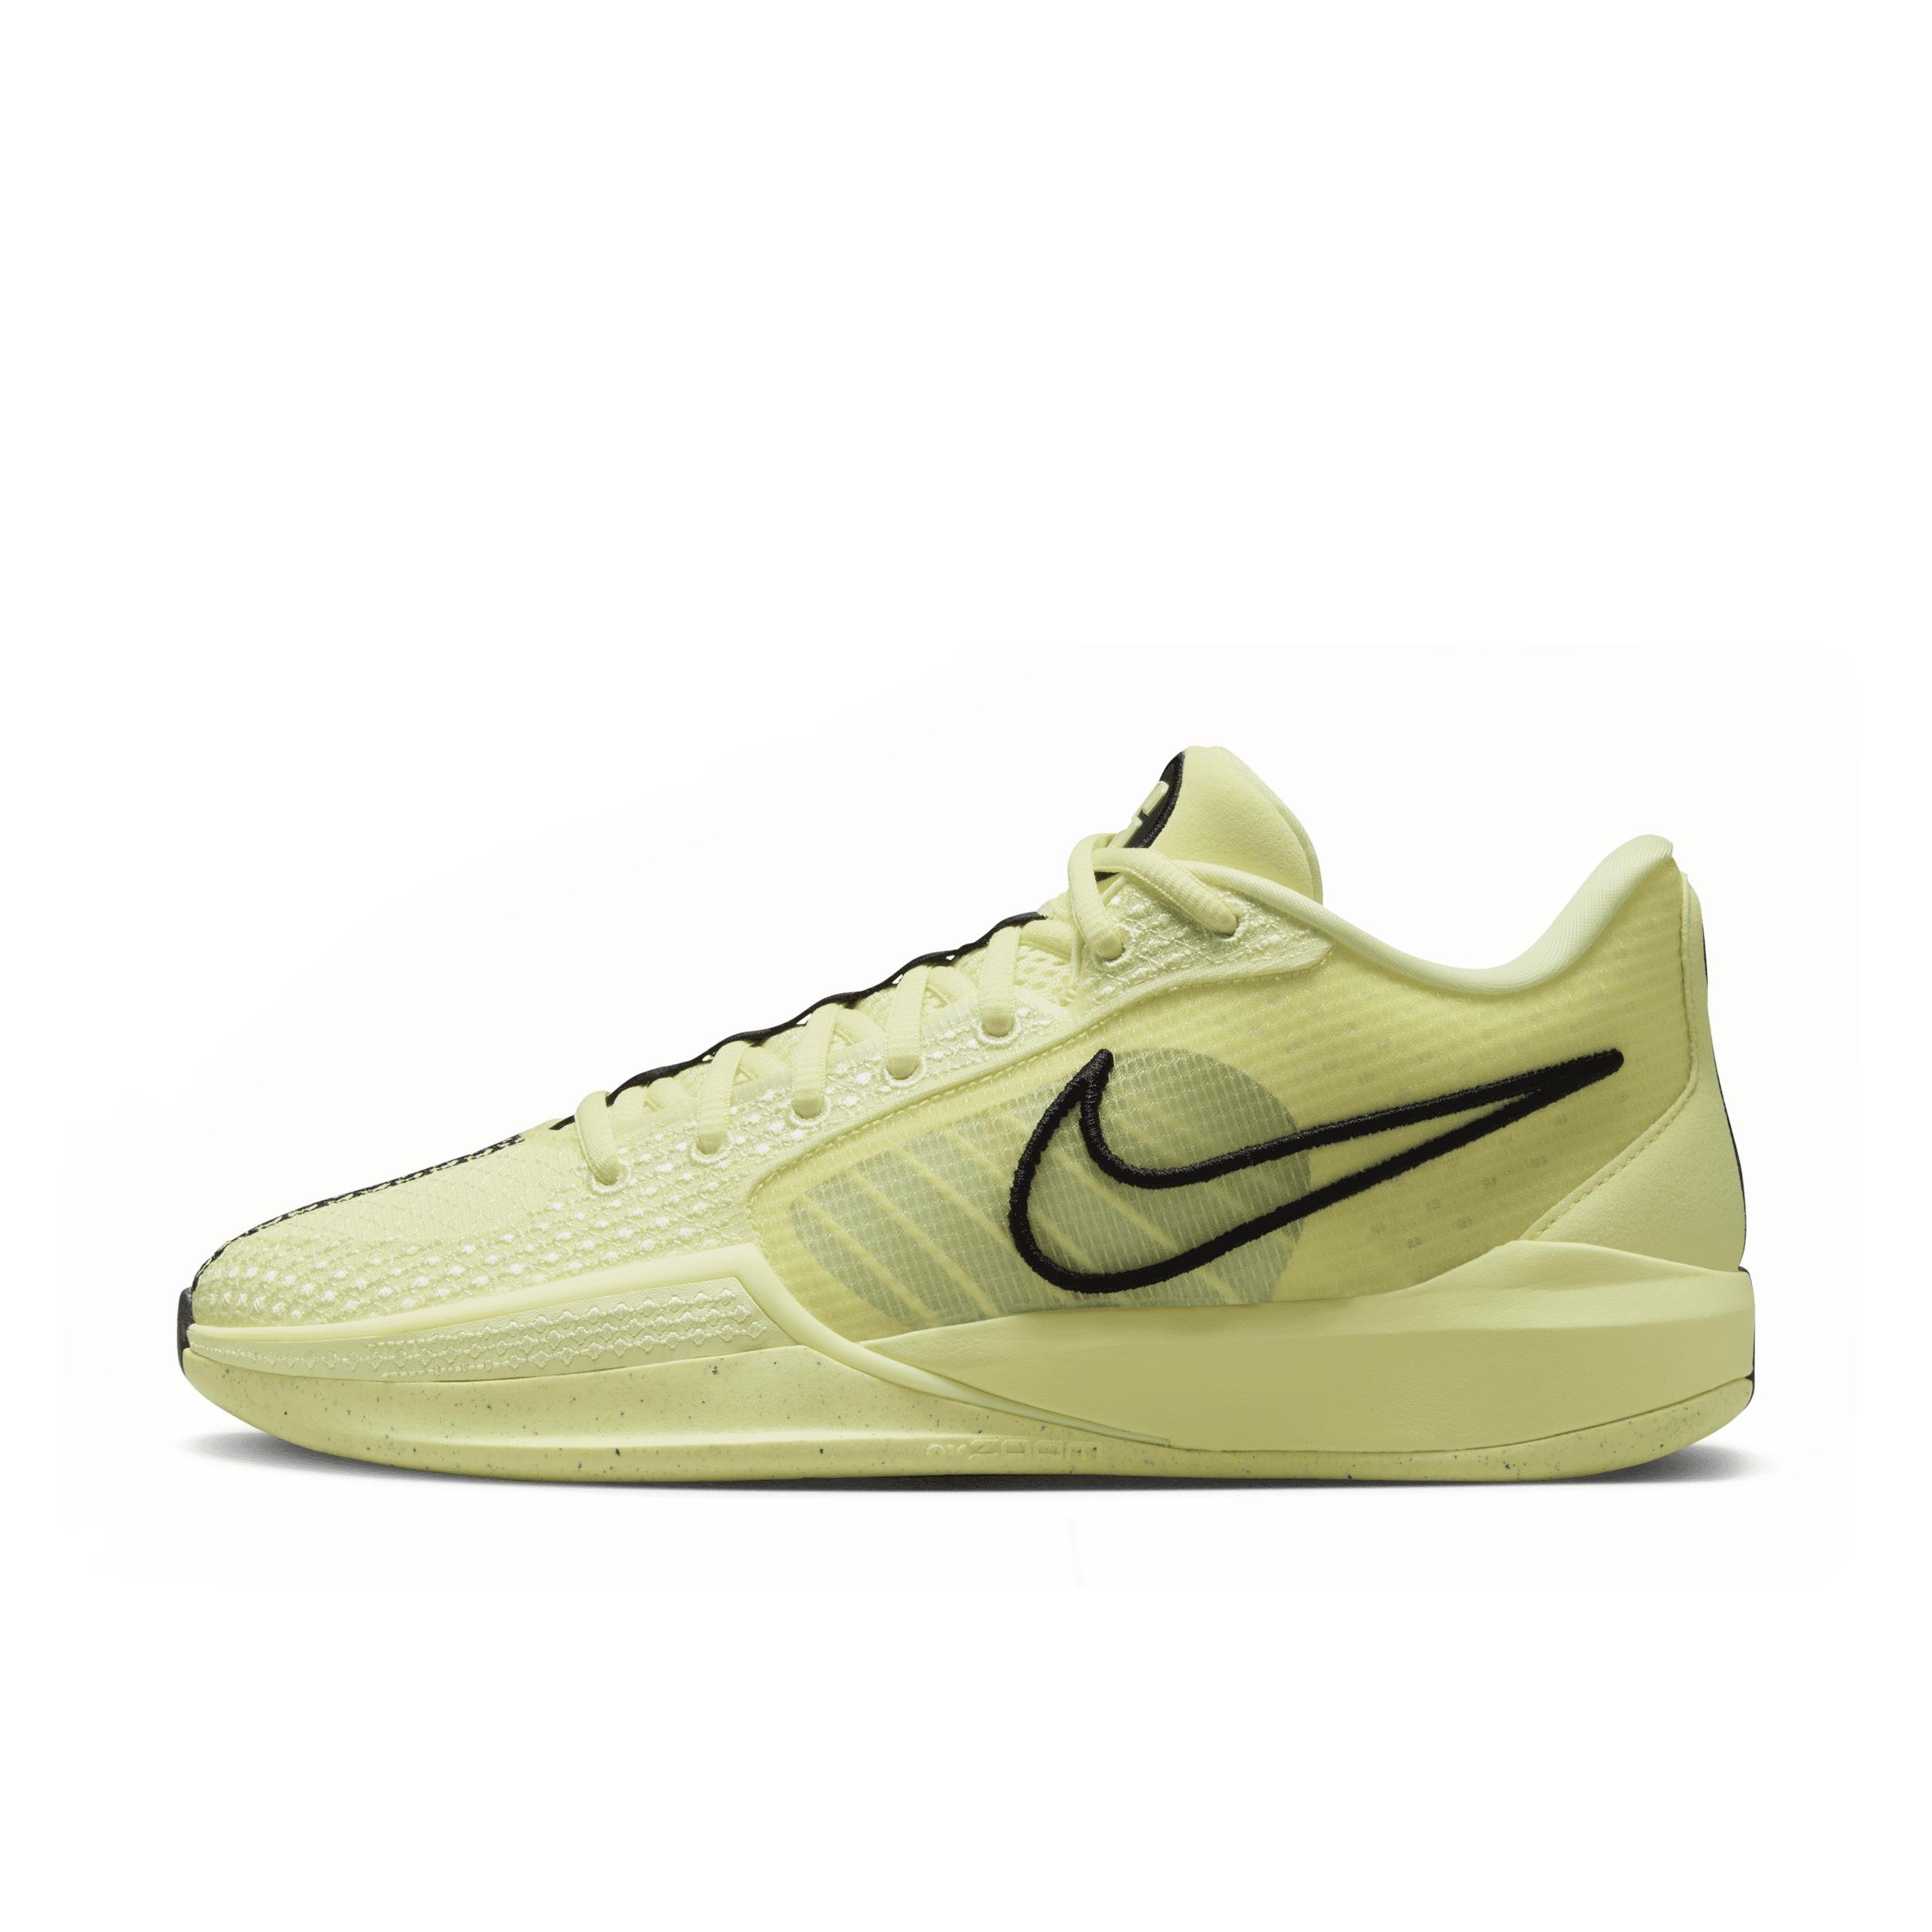 Nike Women's Sabrina 1 "Exclamat!on" Basketball Shoes by NIKE